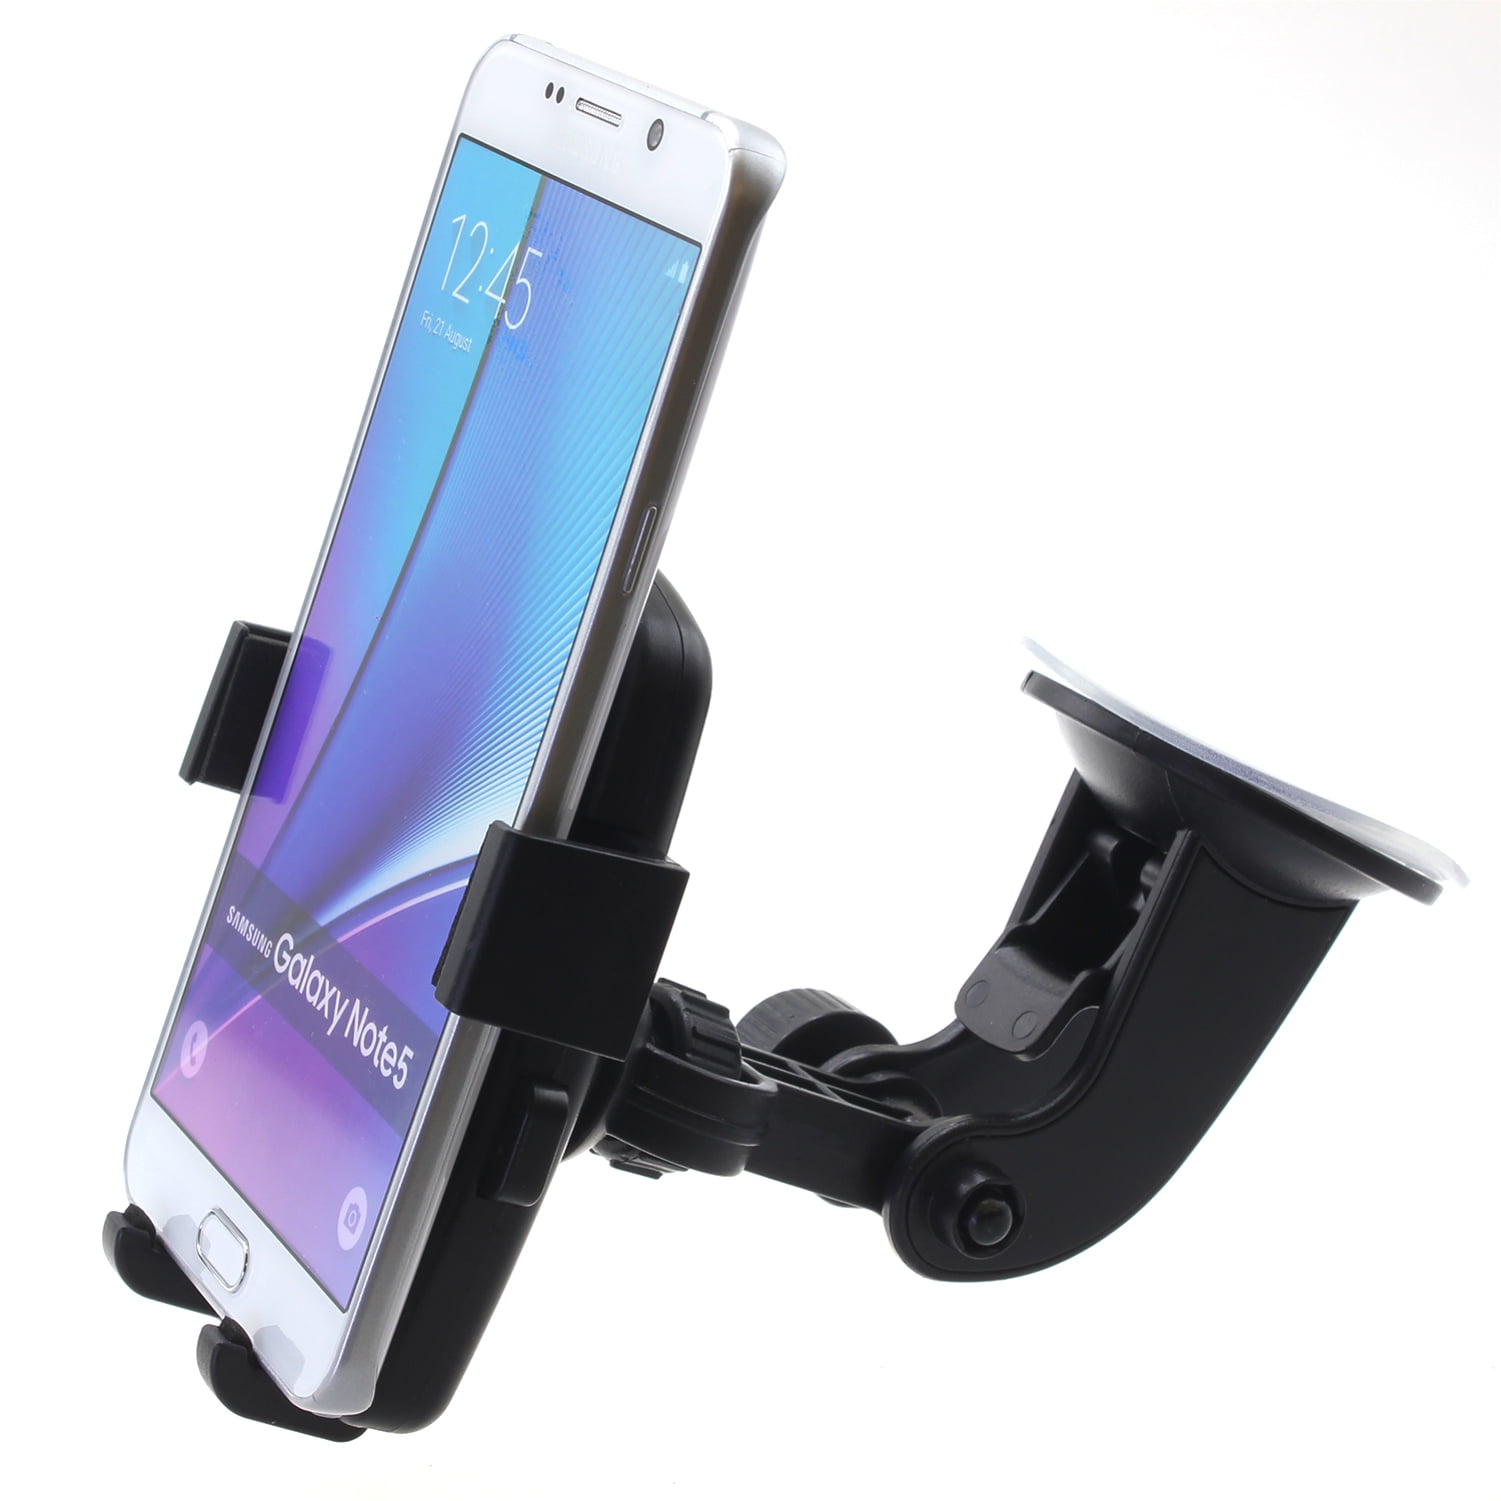 Windshield Car Mount for Galaxy A51, A01 Phones - Holder Glass Cradle ...